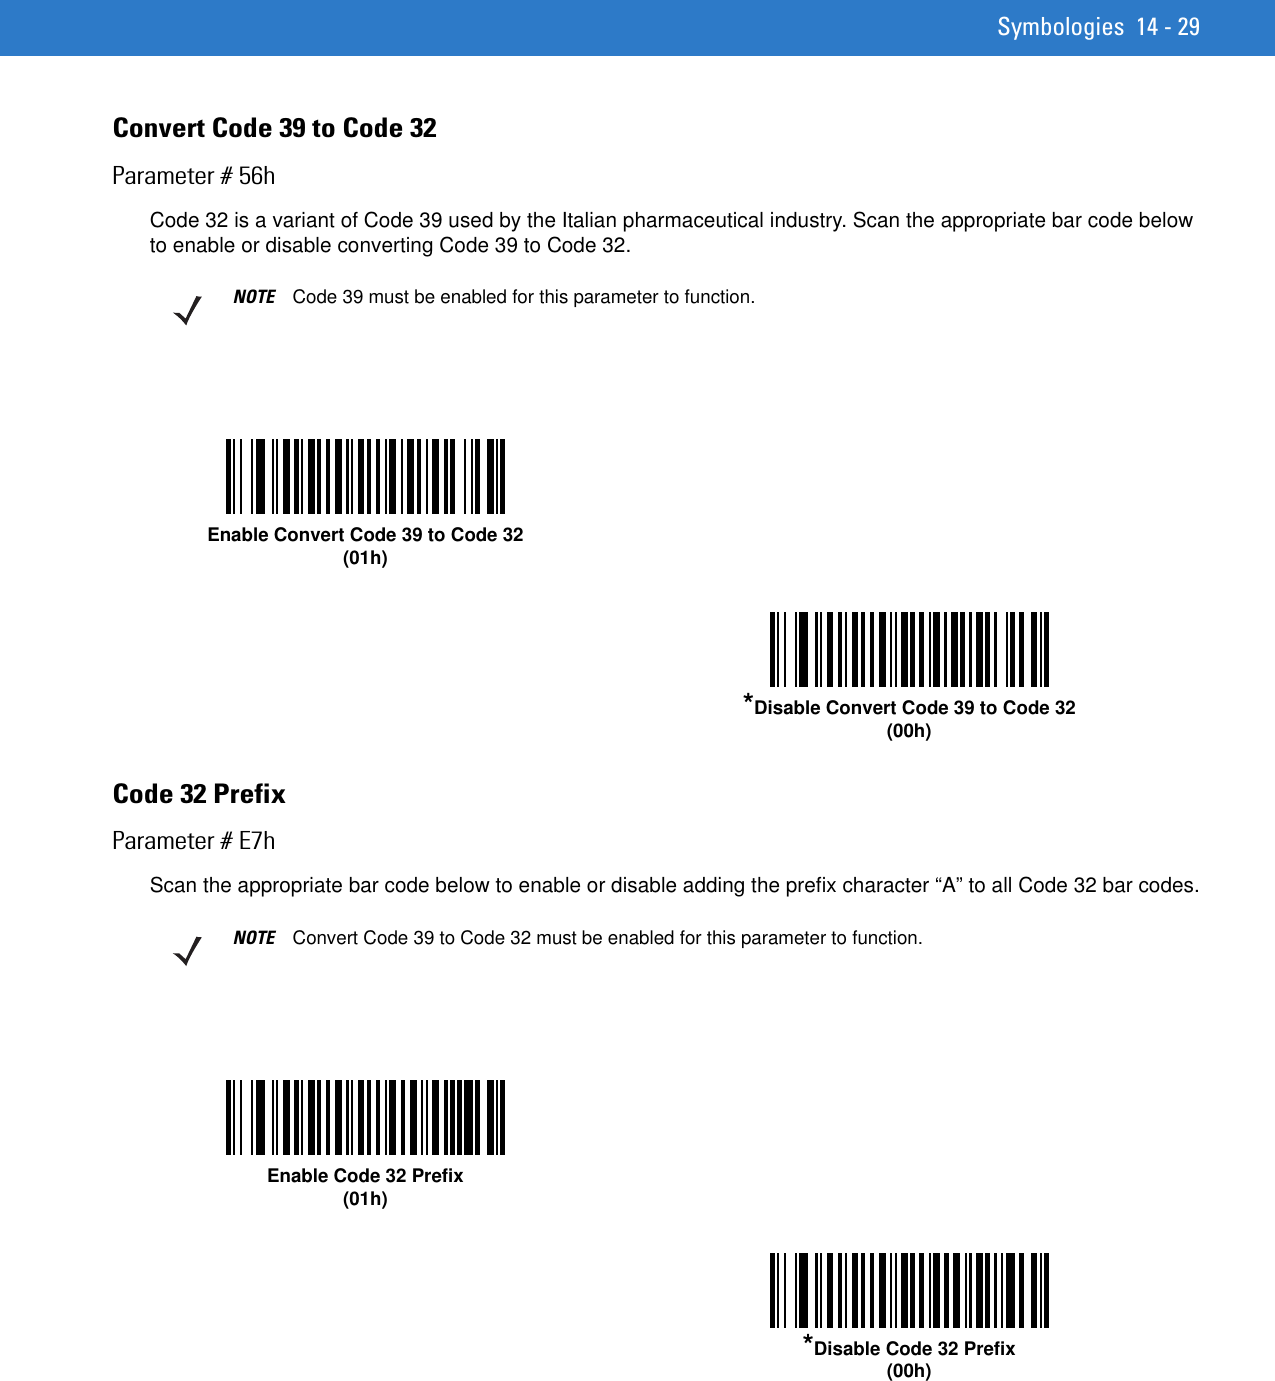 Symbologies 14 - 29Convert Code 39 to Code 32Parameter # 56hCode 32 is a variant of Code 39 used by the Italian pharmaceutical industry. Scan the appropriate bar code below to enable or disable converting Code 39 to Code 32.Code 32 PrefixParameter # E7hScan the appropriate bar code below to enable or disable adding the prefix character “A” to all Code 32 bar codes.NOTE Code 39 must be enabled for this parameter to function.Enable Convert Code 39 to Code 32(01h)*Disable Convert Code 39 to Code 32(00h)NOTE Convert Code 39 to Code 32 must be enabled for this parameter to function.Enable Code 32 Prefix(01h)*Disable Code 32 Prefix(00h)